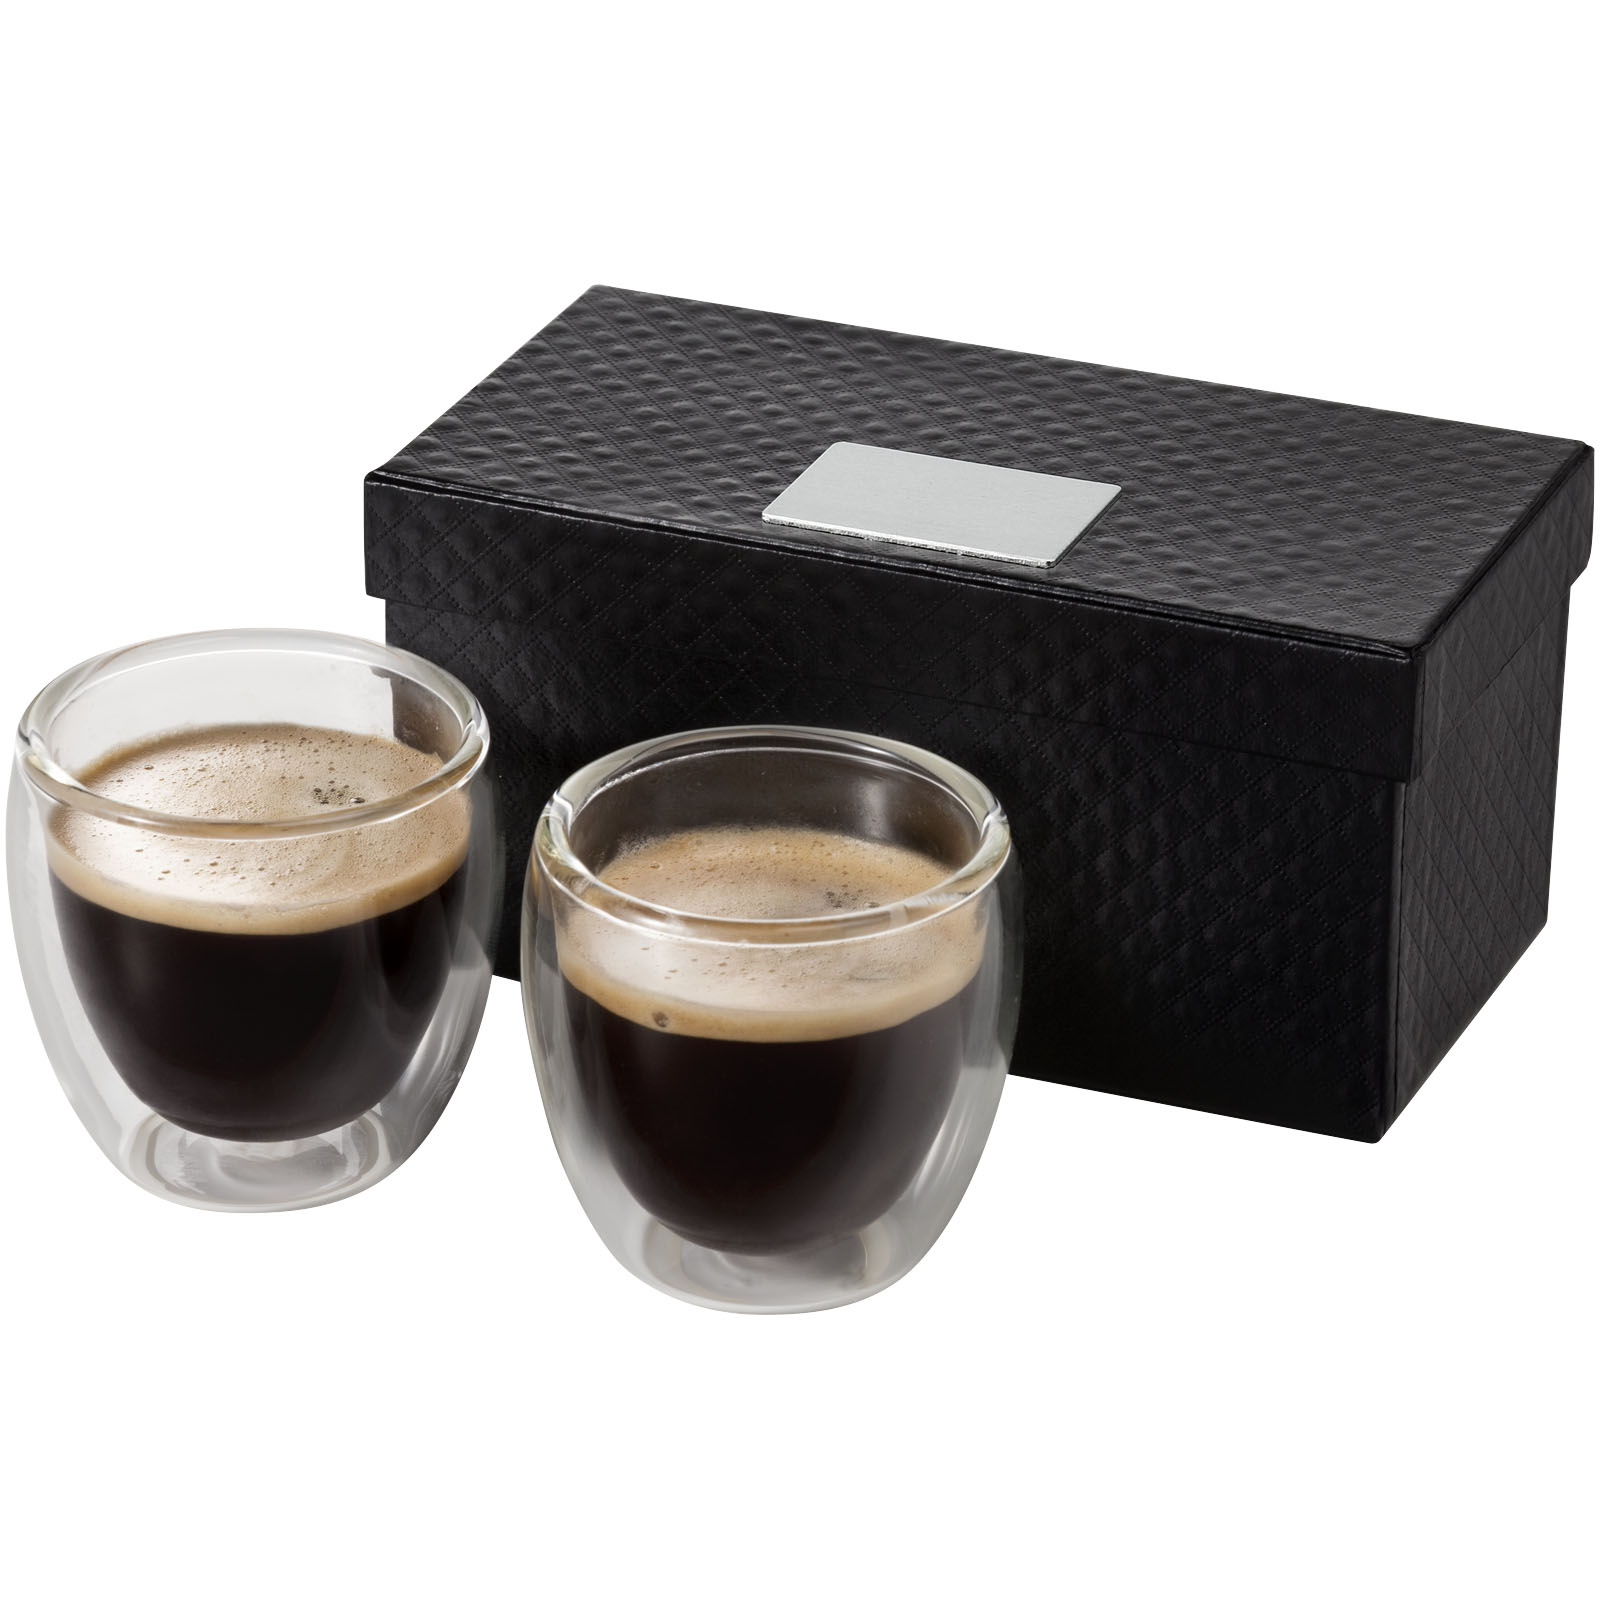 Luxury Double-Walled Espresso Glass Set with Gift Box - Woodford - Eastleigh